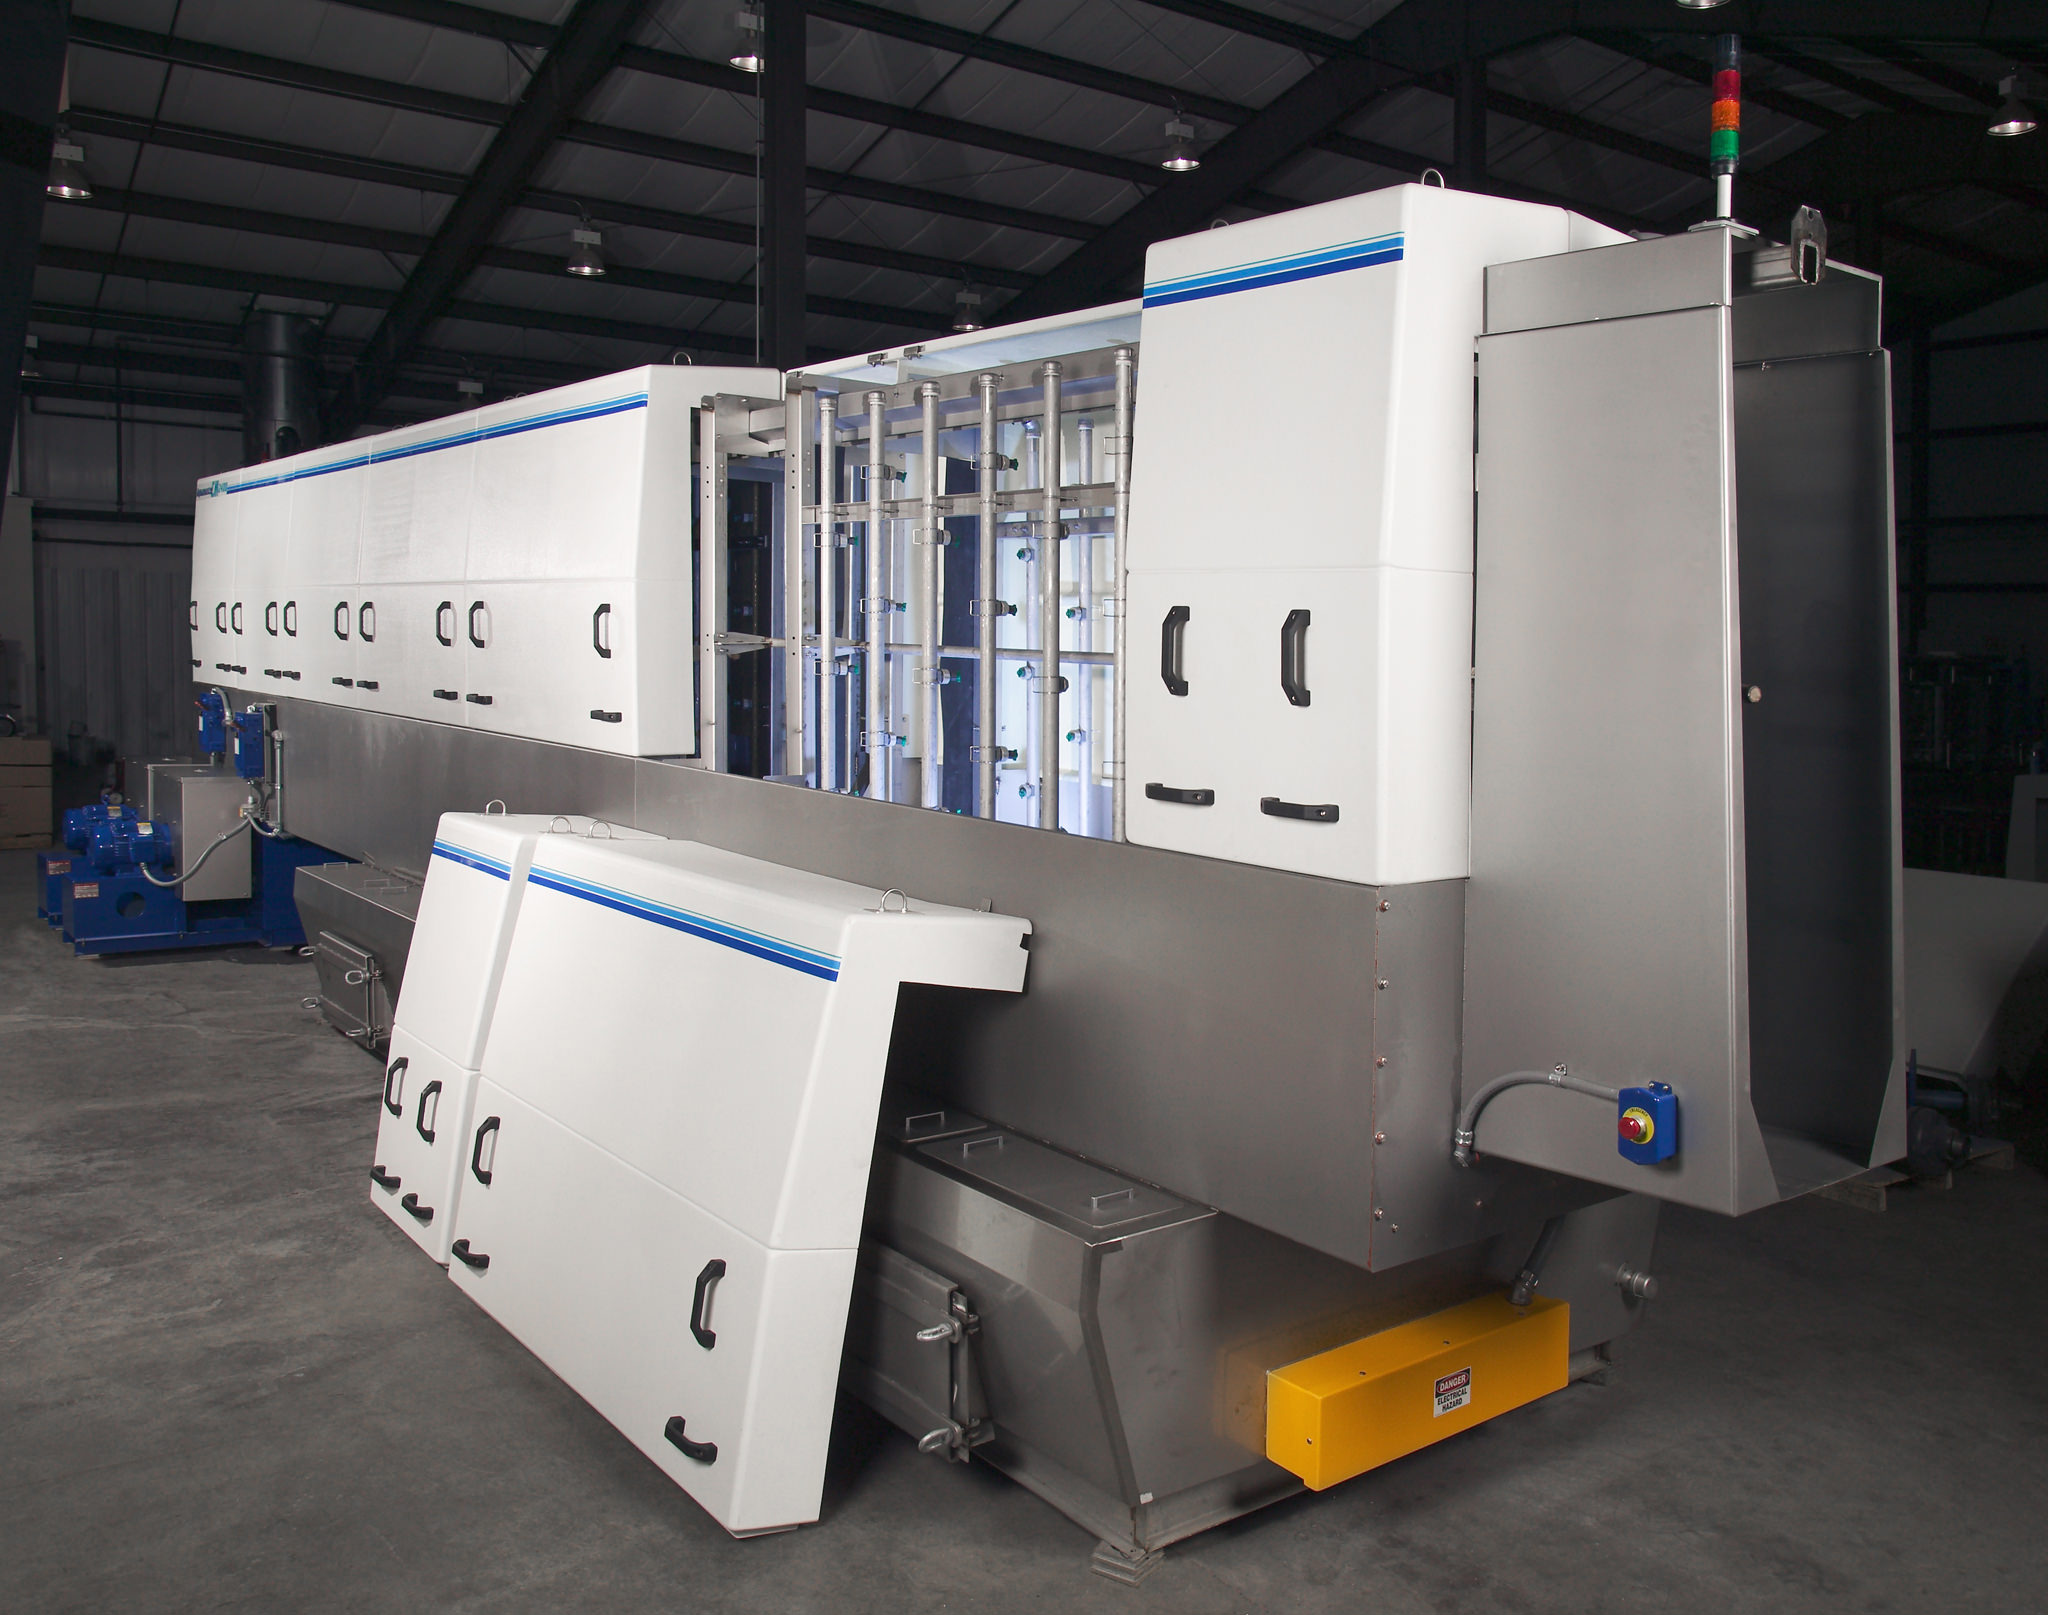 Full Access Canopy on Monorail Washer